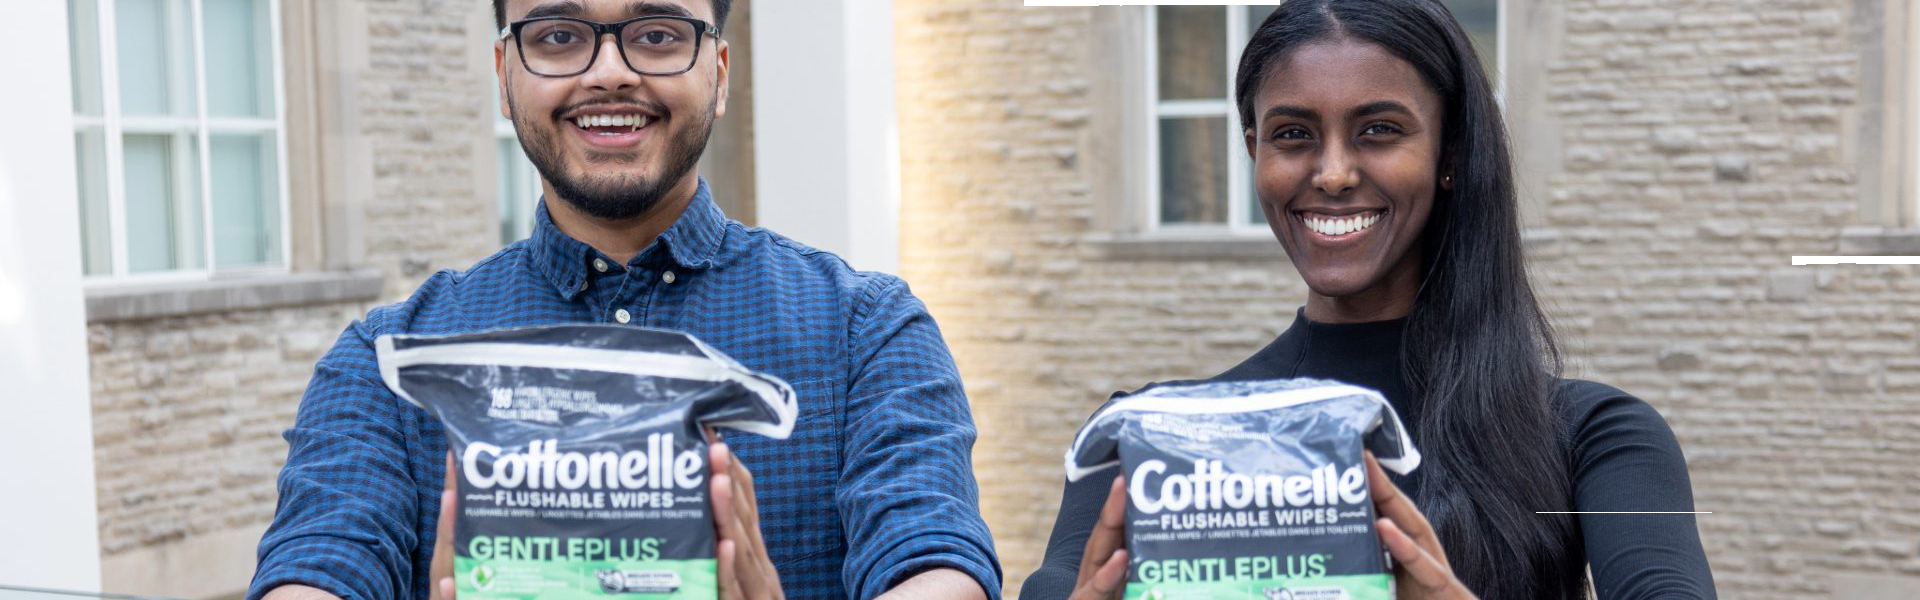 Students pose with packages of flushable wipes